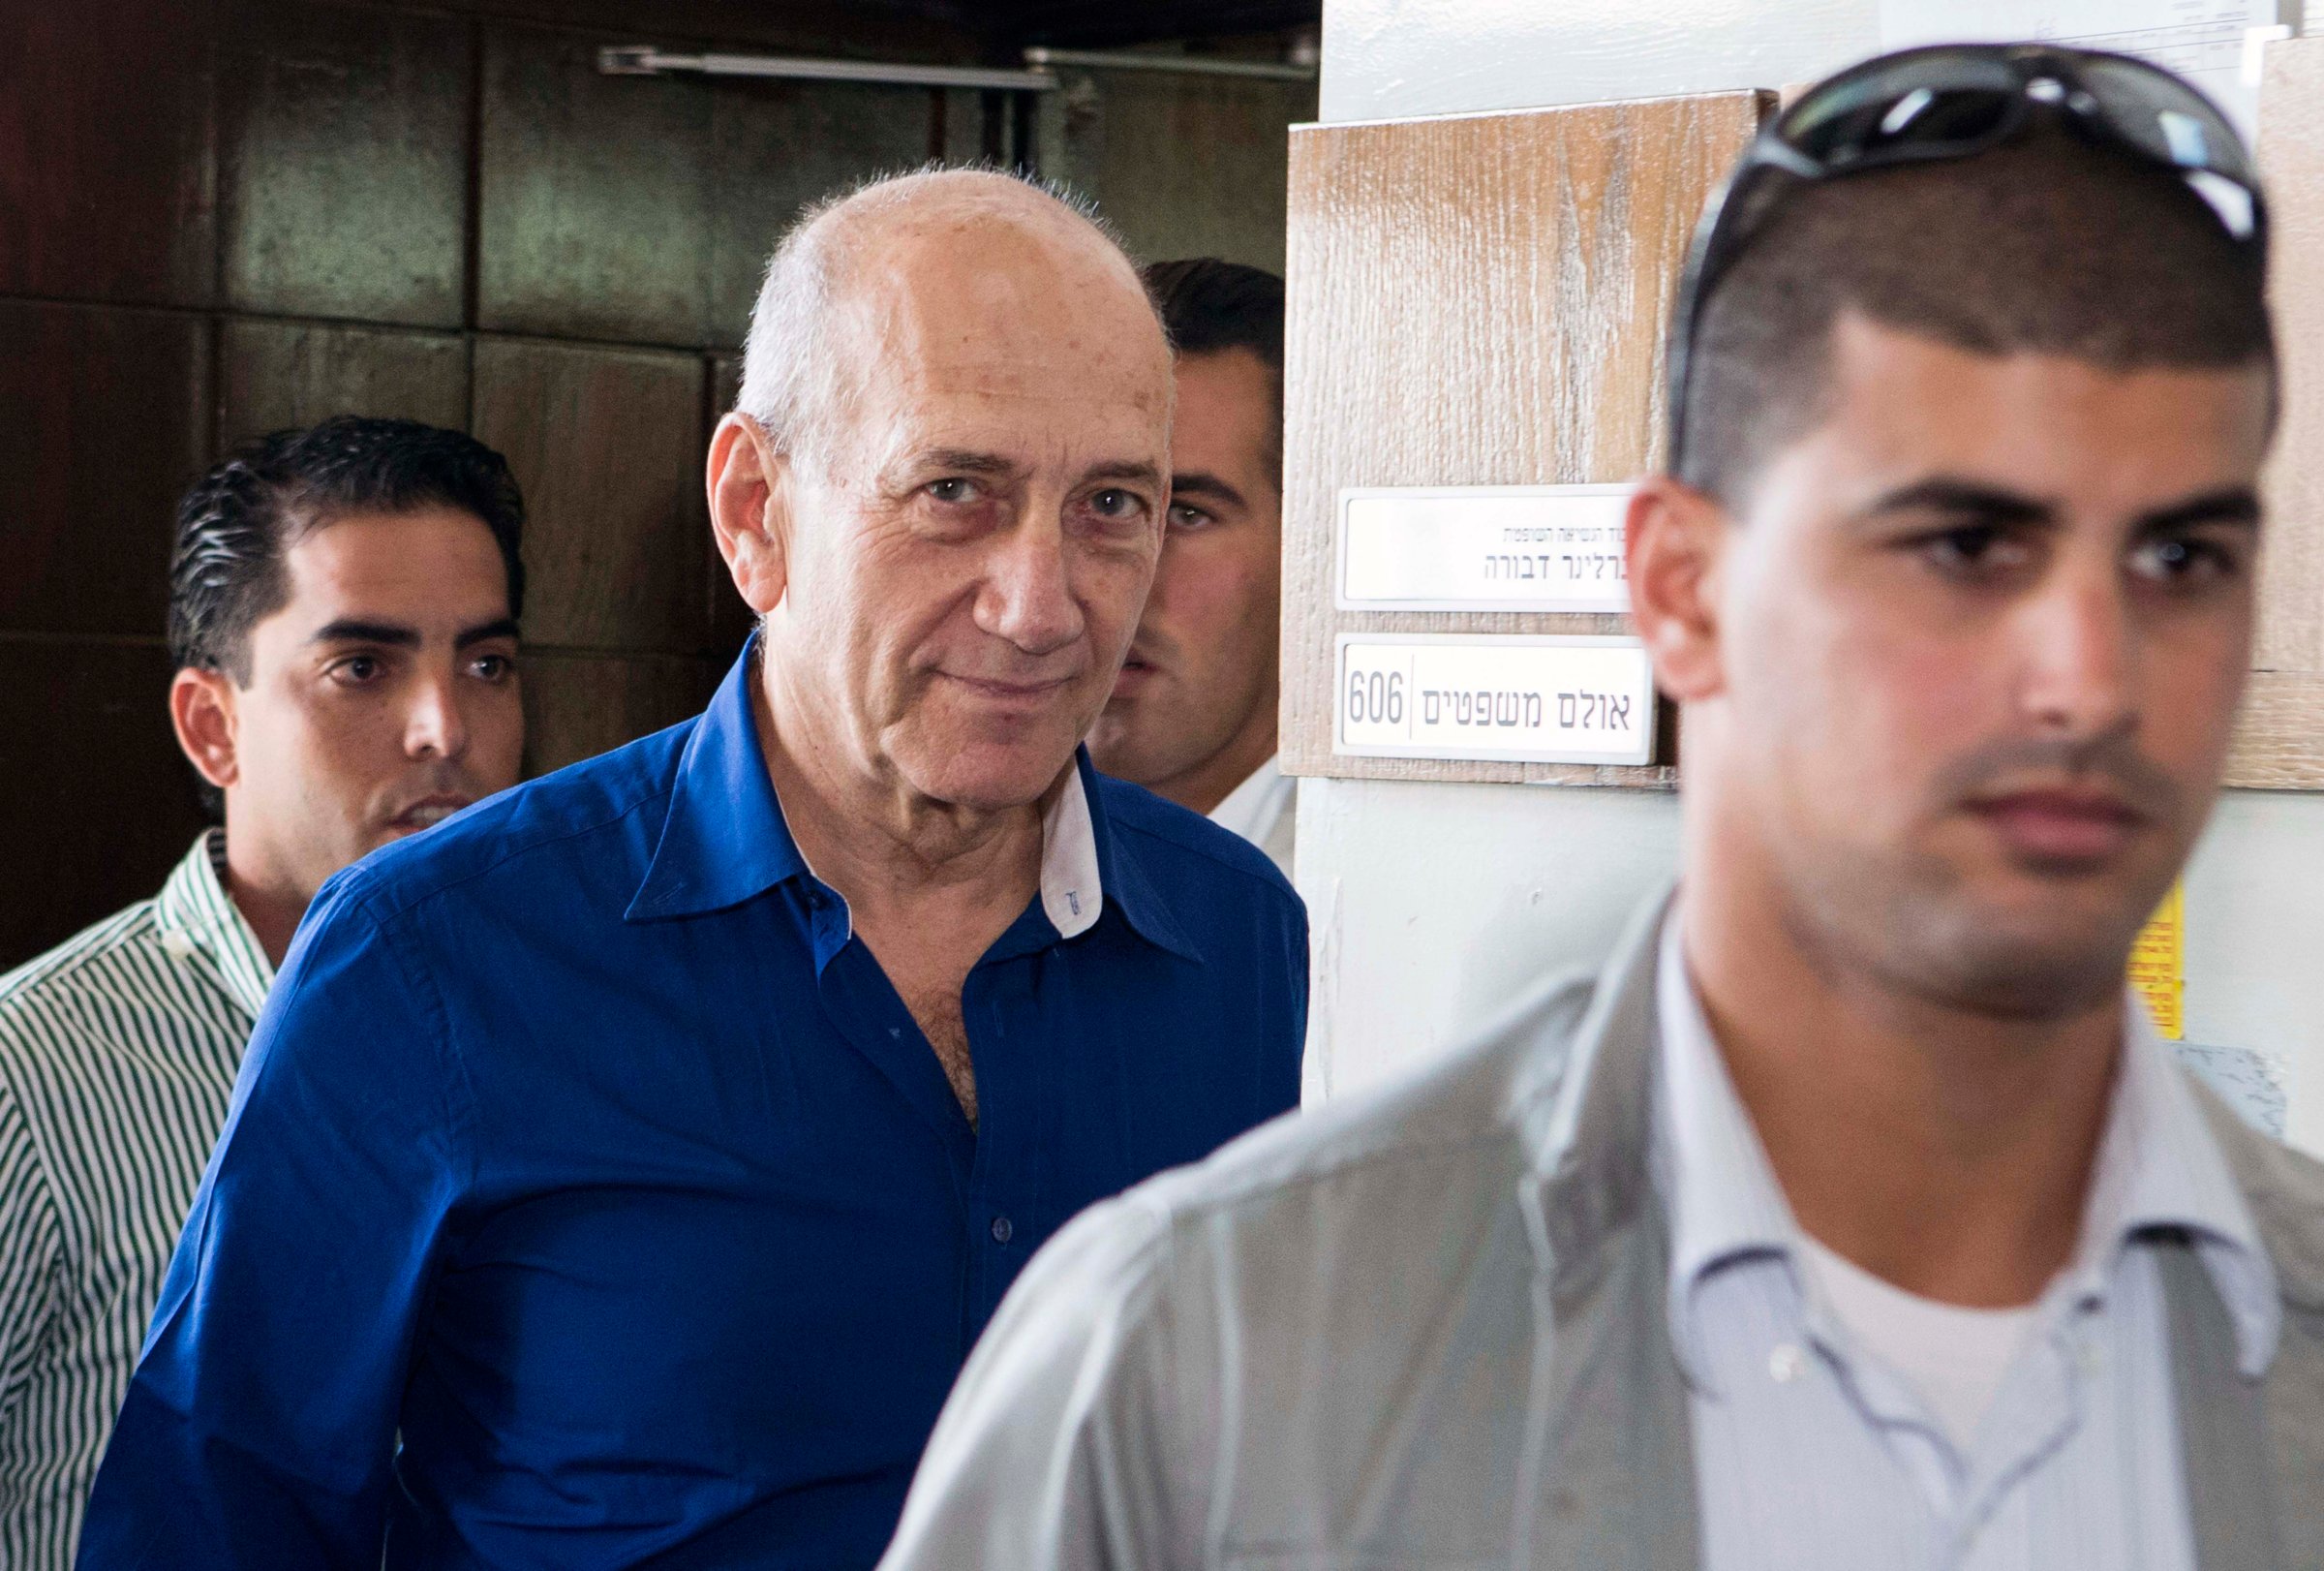 Former Israel prime minister Ehud Olmert is sentenced to 6 years accusation of corruption in Tel Aviv, Israel on May 13, 2014.